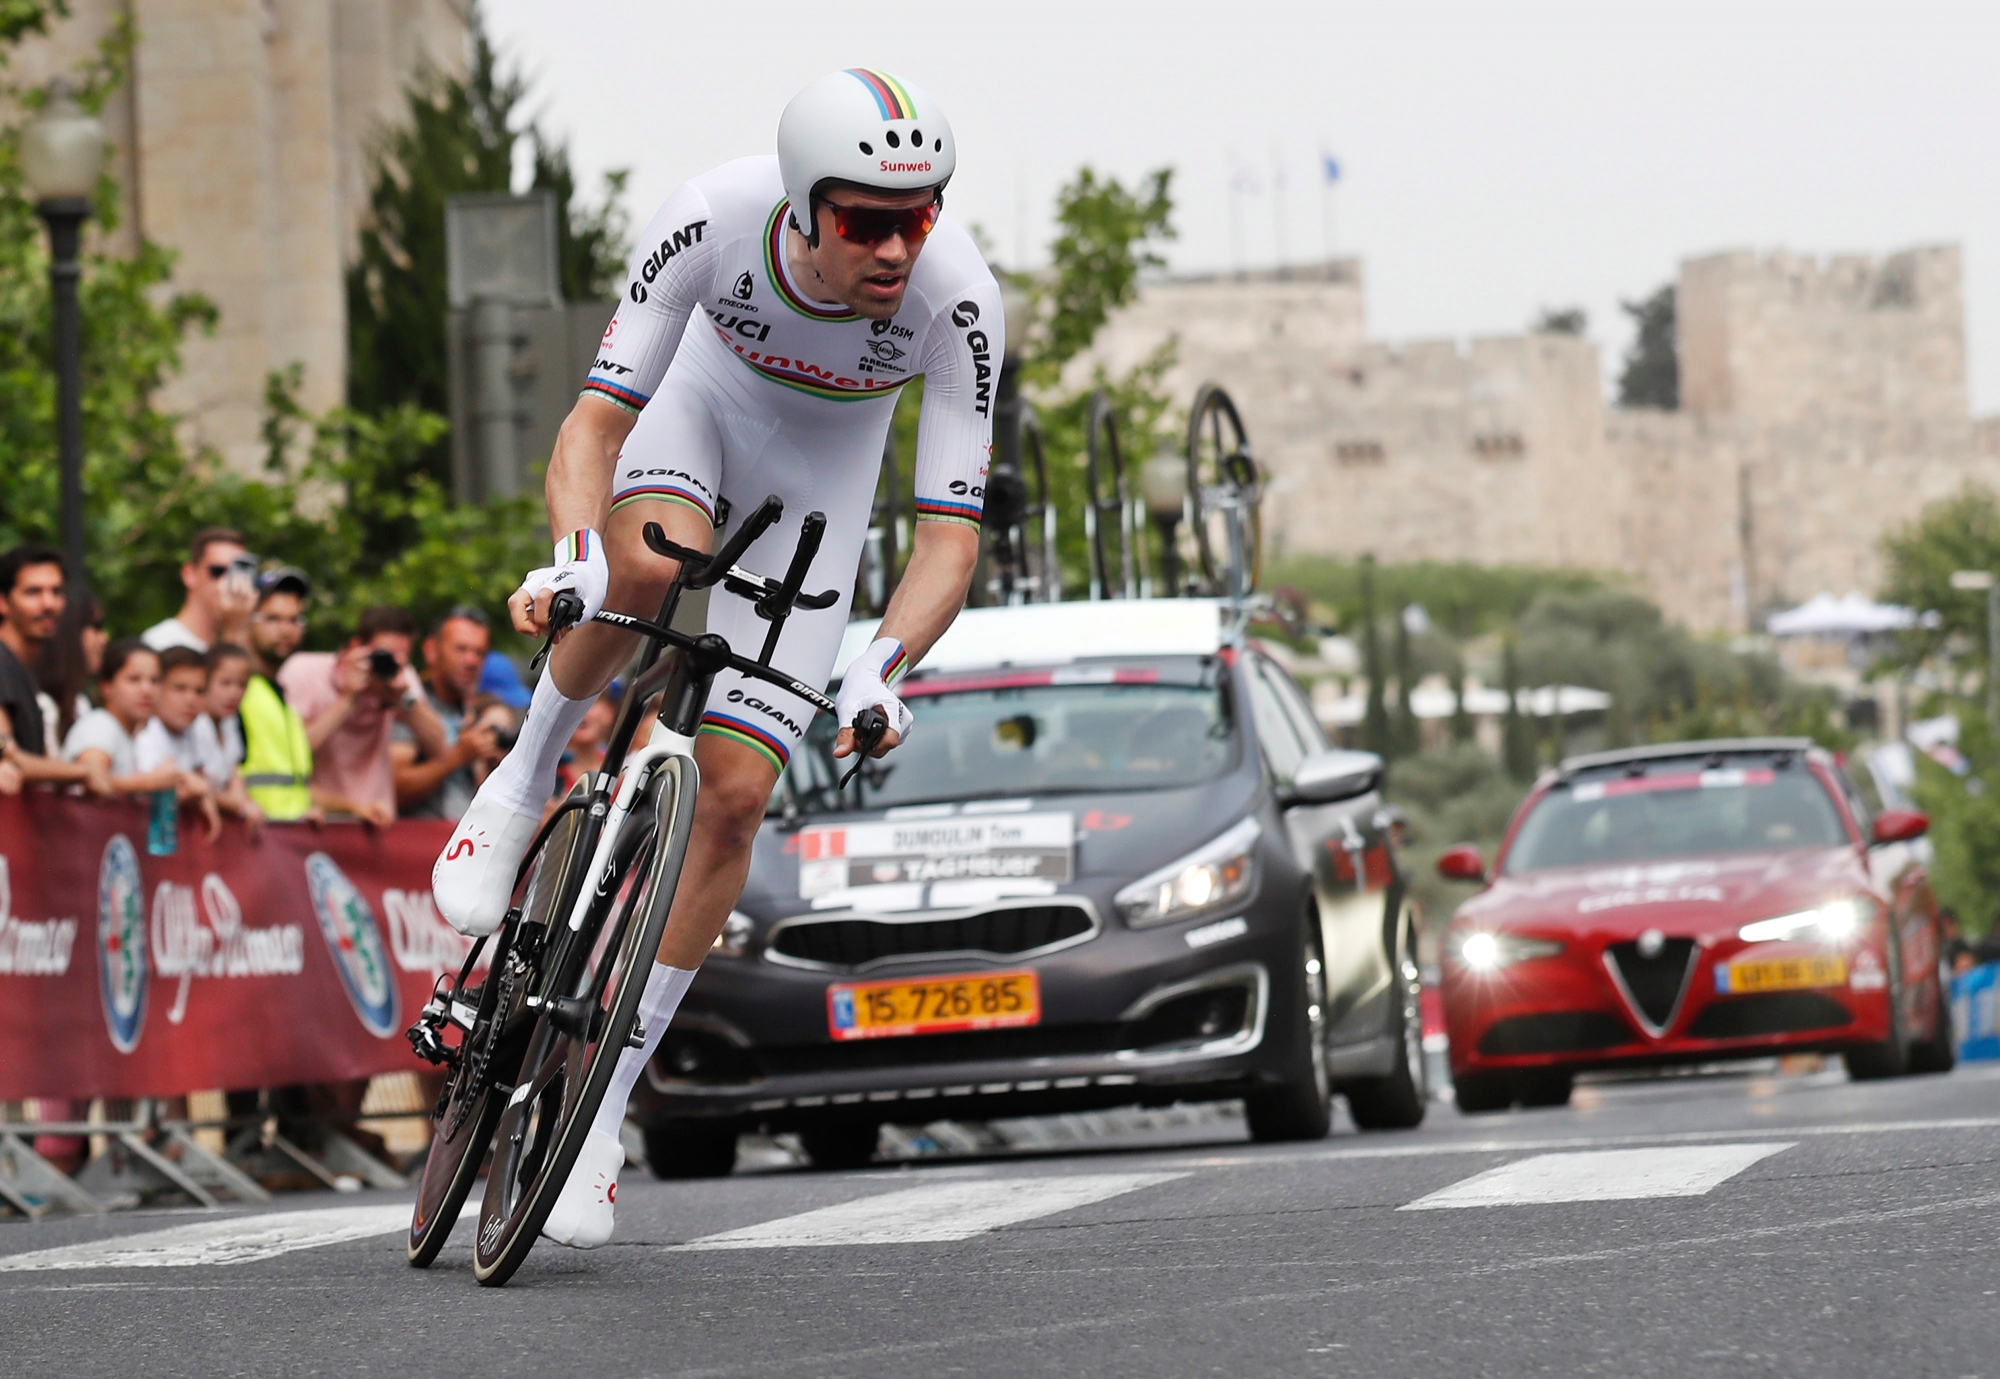 epa06710933 Dutch cyclist Tom Dumoulin of Team Sunweb in action during the first stage of the Giro d'Italia cycling race, a 9.7km individual time trial in Jerusalem, Israel, 04 May 2018.  EPA/ATEF SAFADI ISRAEL CYCLING GIRO D'ITALIA 2018